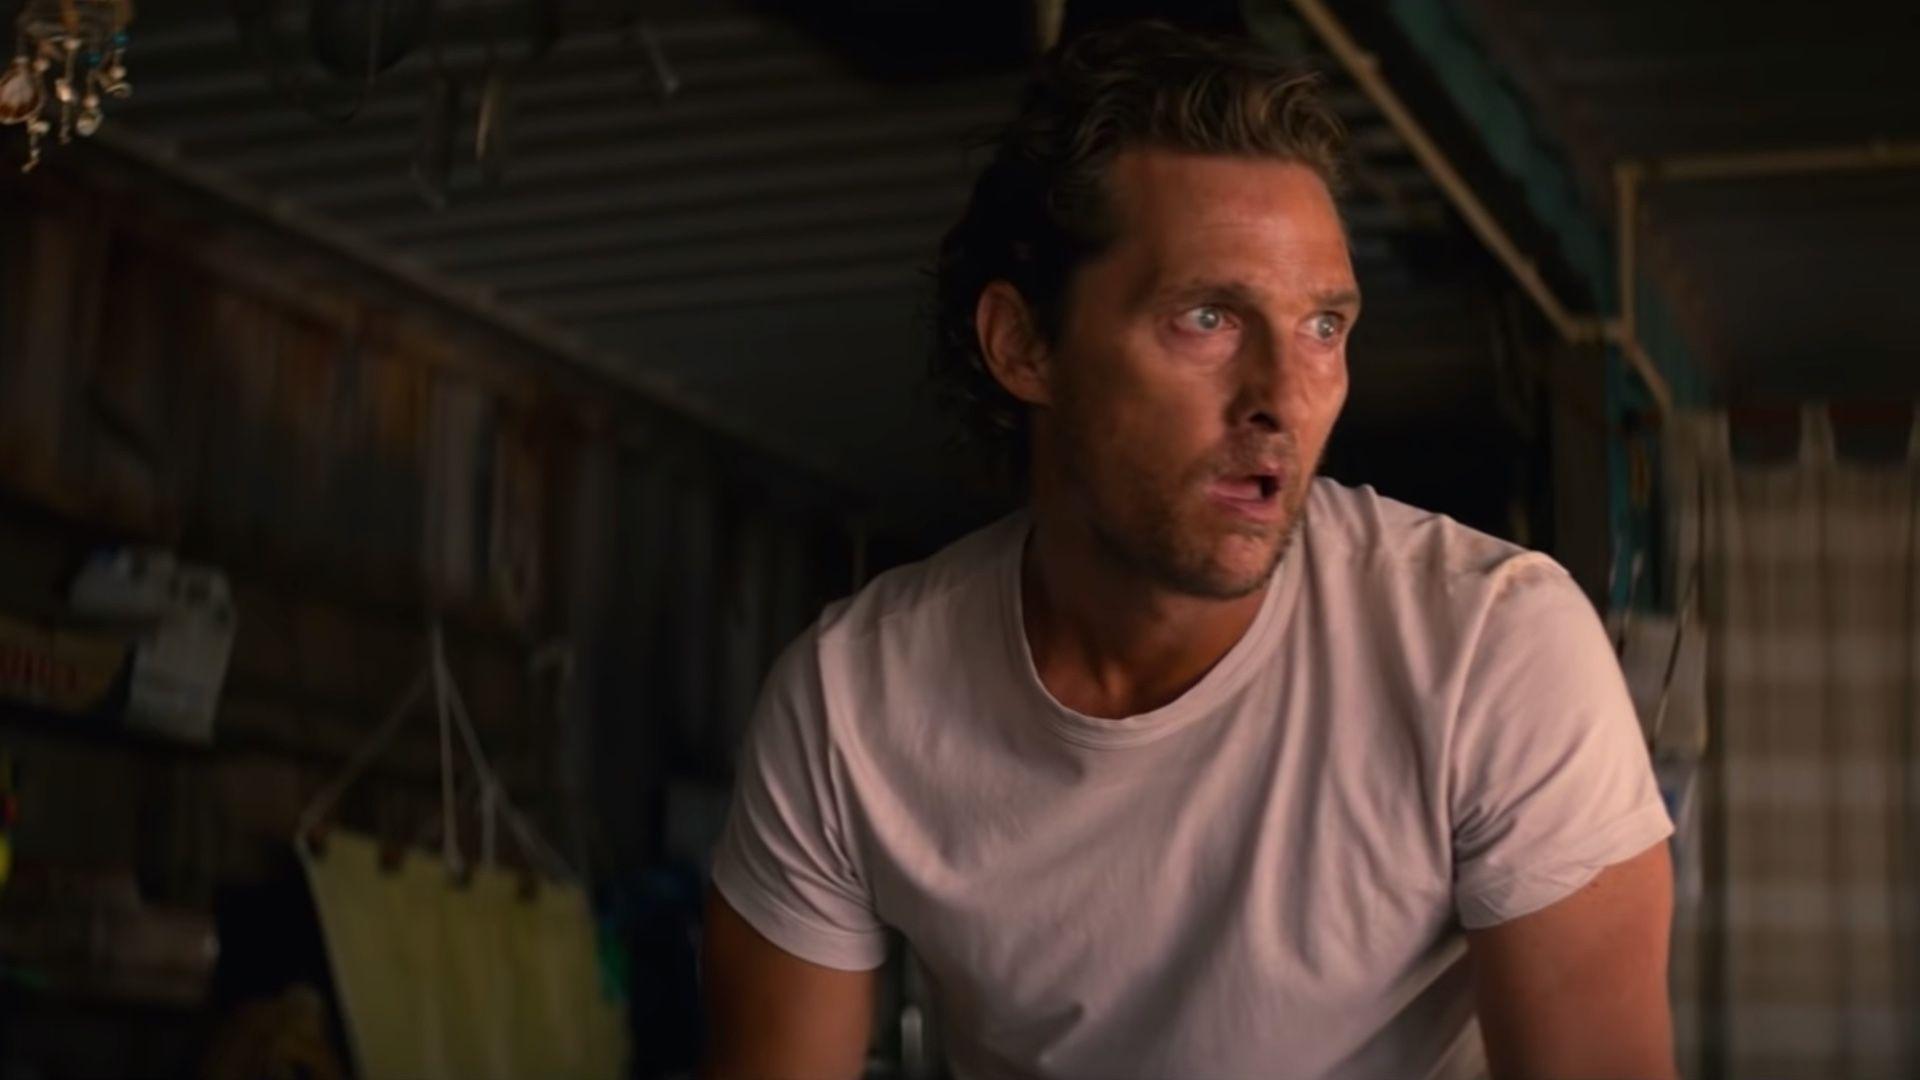 New for Matthew McConaughey and Anne Hathaway's Thriller